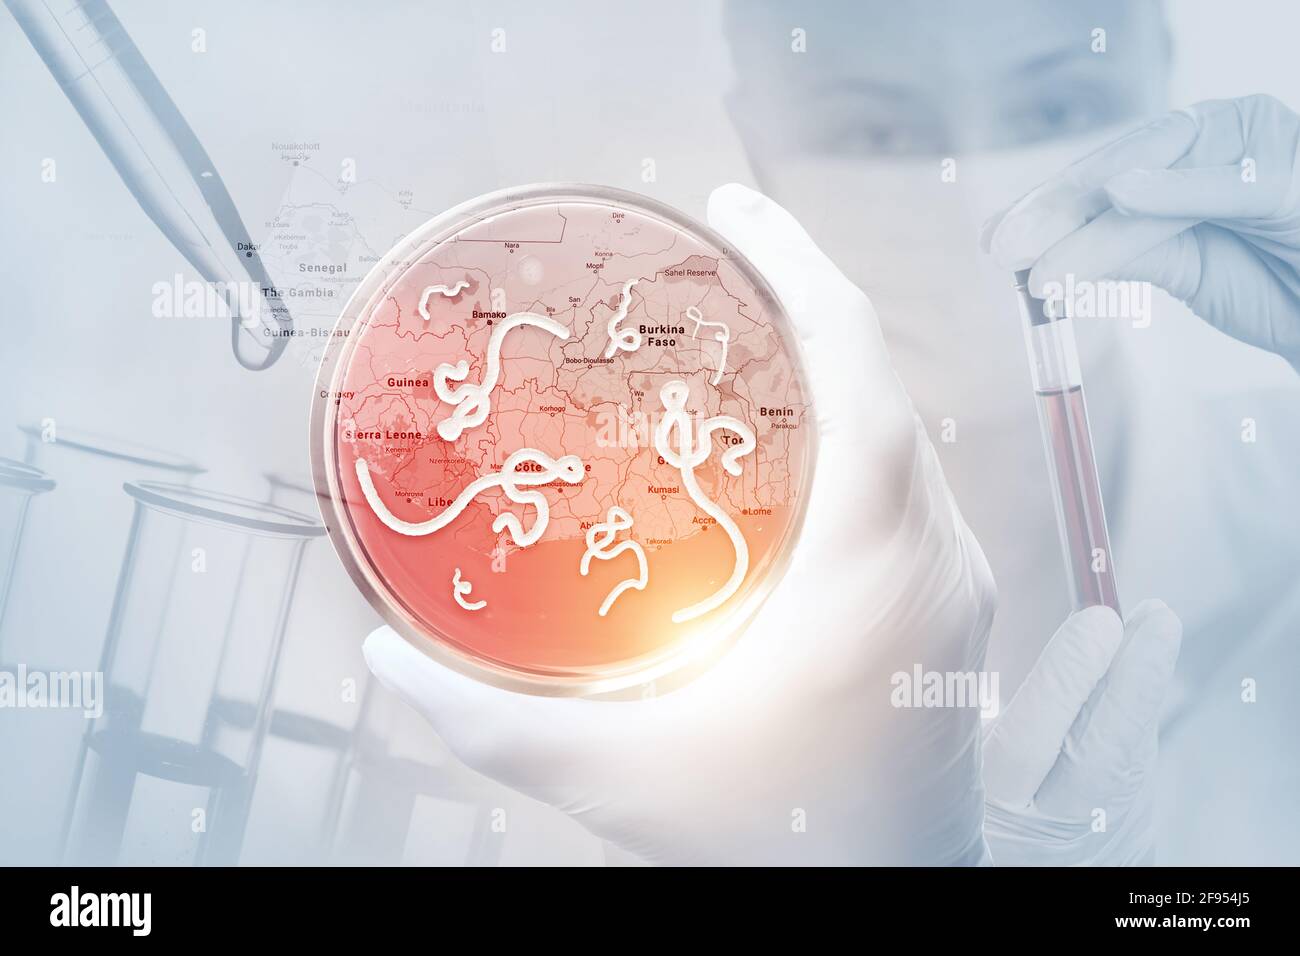 Microscopic view of the Ebola virus. Medical concept. Stock Photo